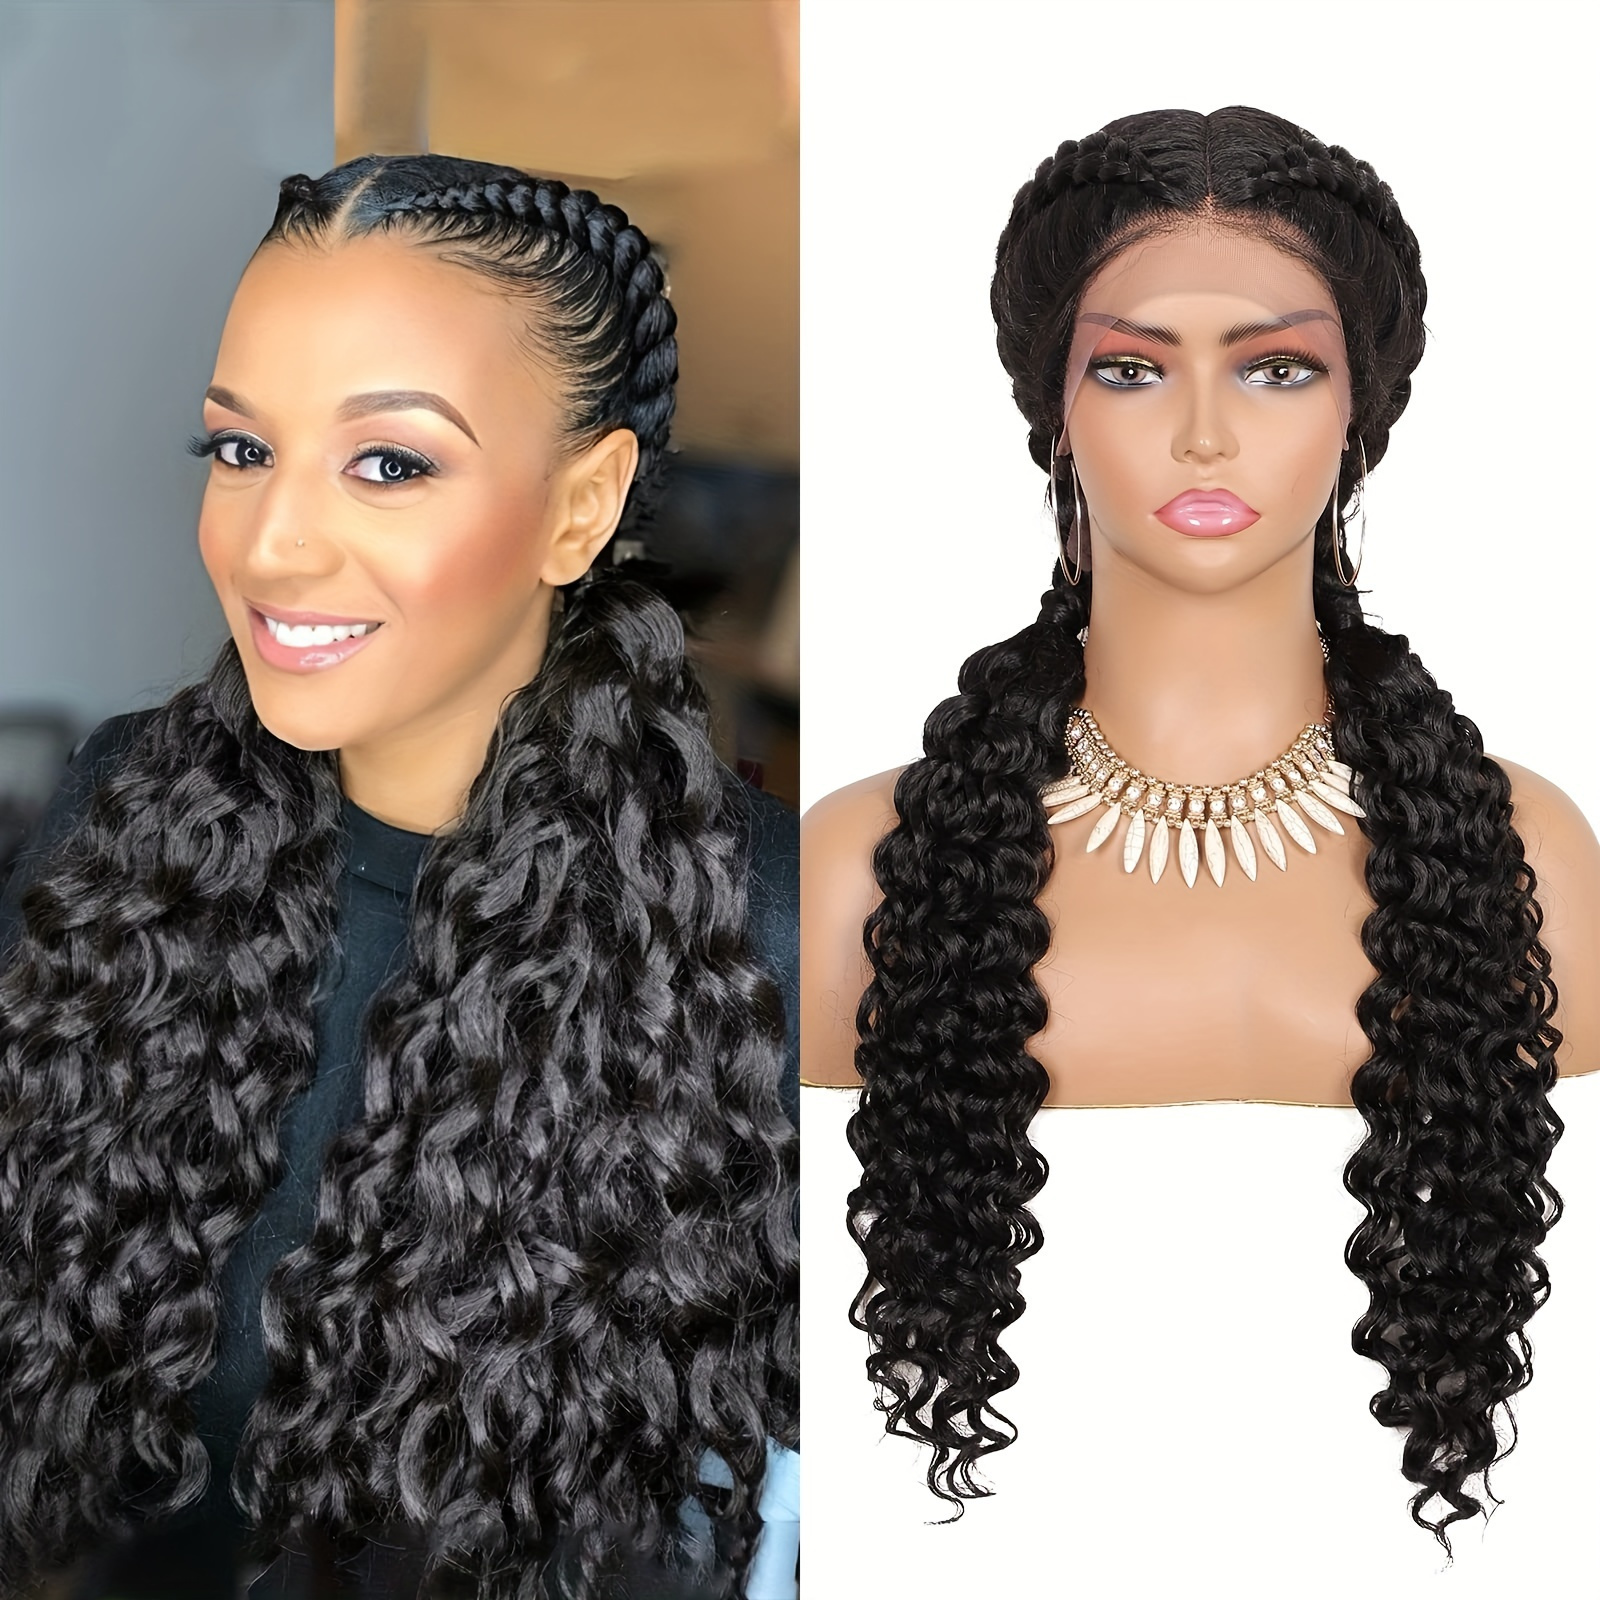  Kalyss 28 Lace Front Cornrow Braided Wigs for Women